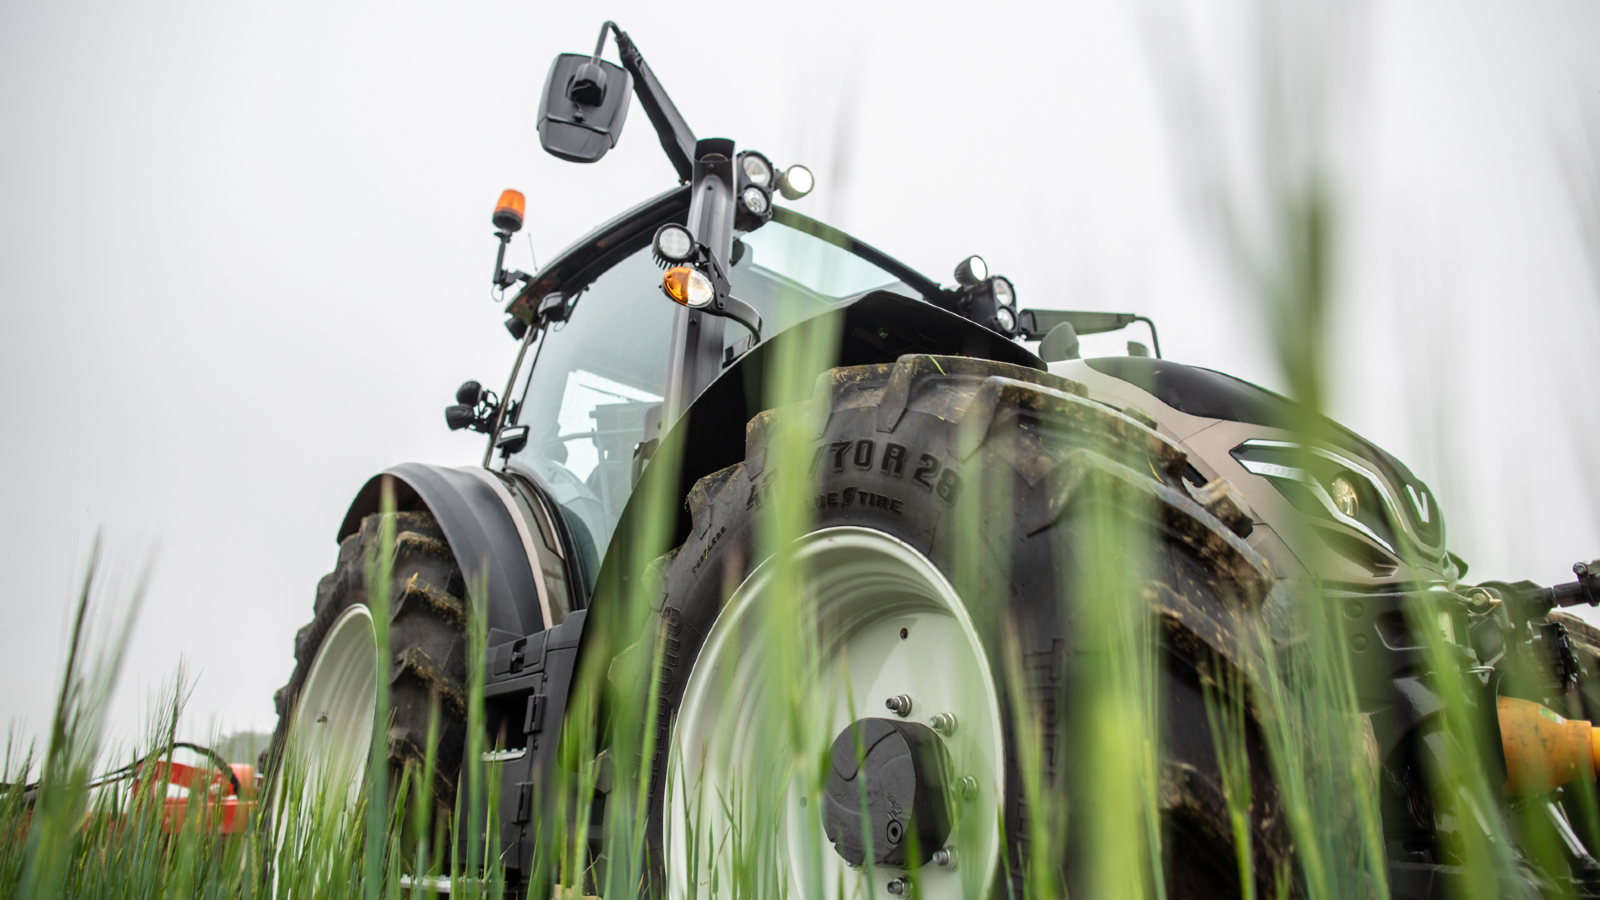 Valtra G Series tractor in the field